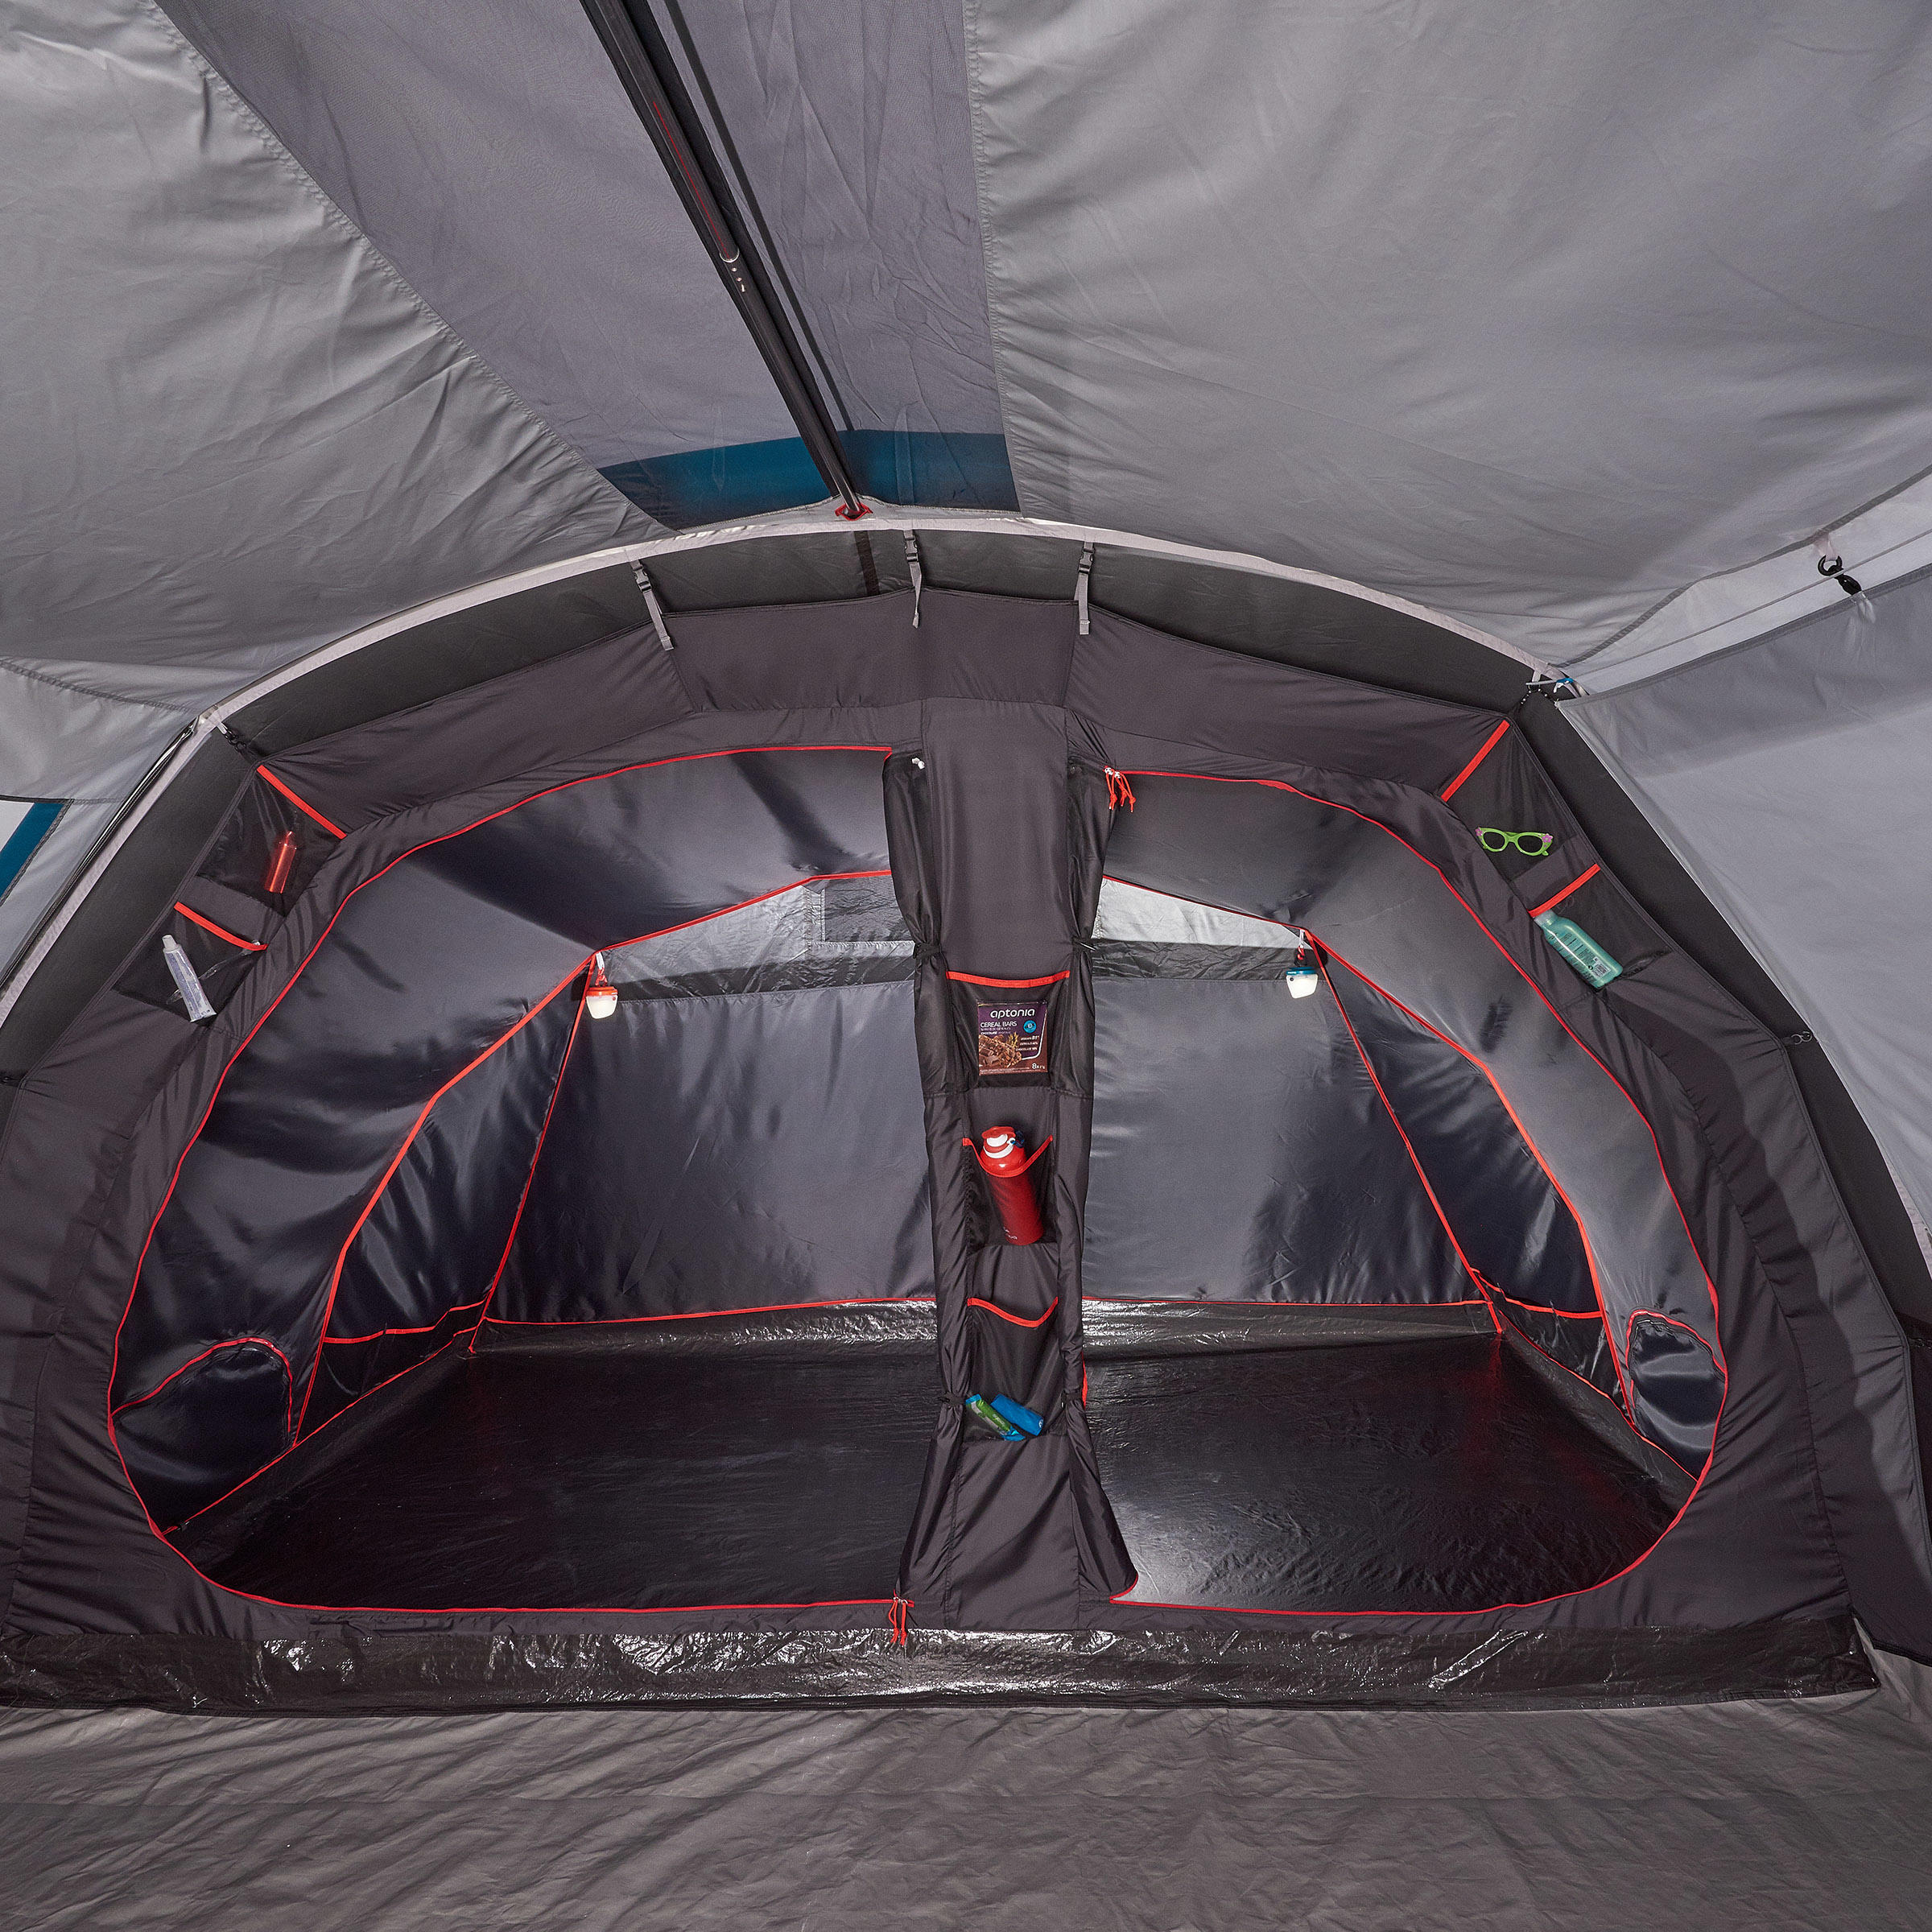 REFURBISHED BEDROOM AND GROUNDSHEET - SPARE PART AIR SECONDS 5.2 TENT-A GRADE 3/6